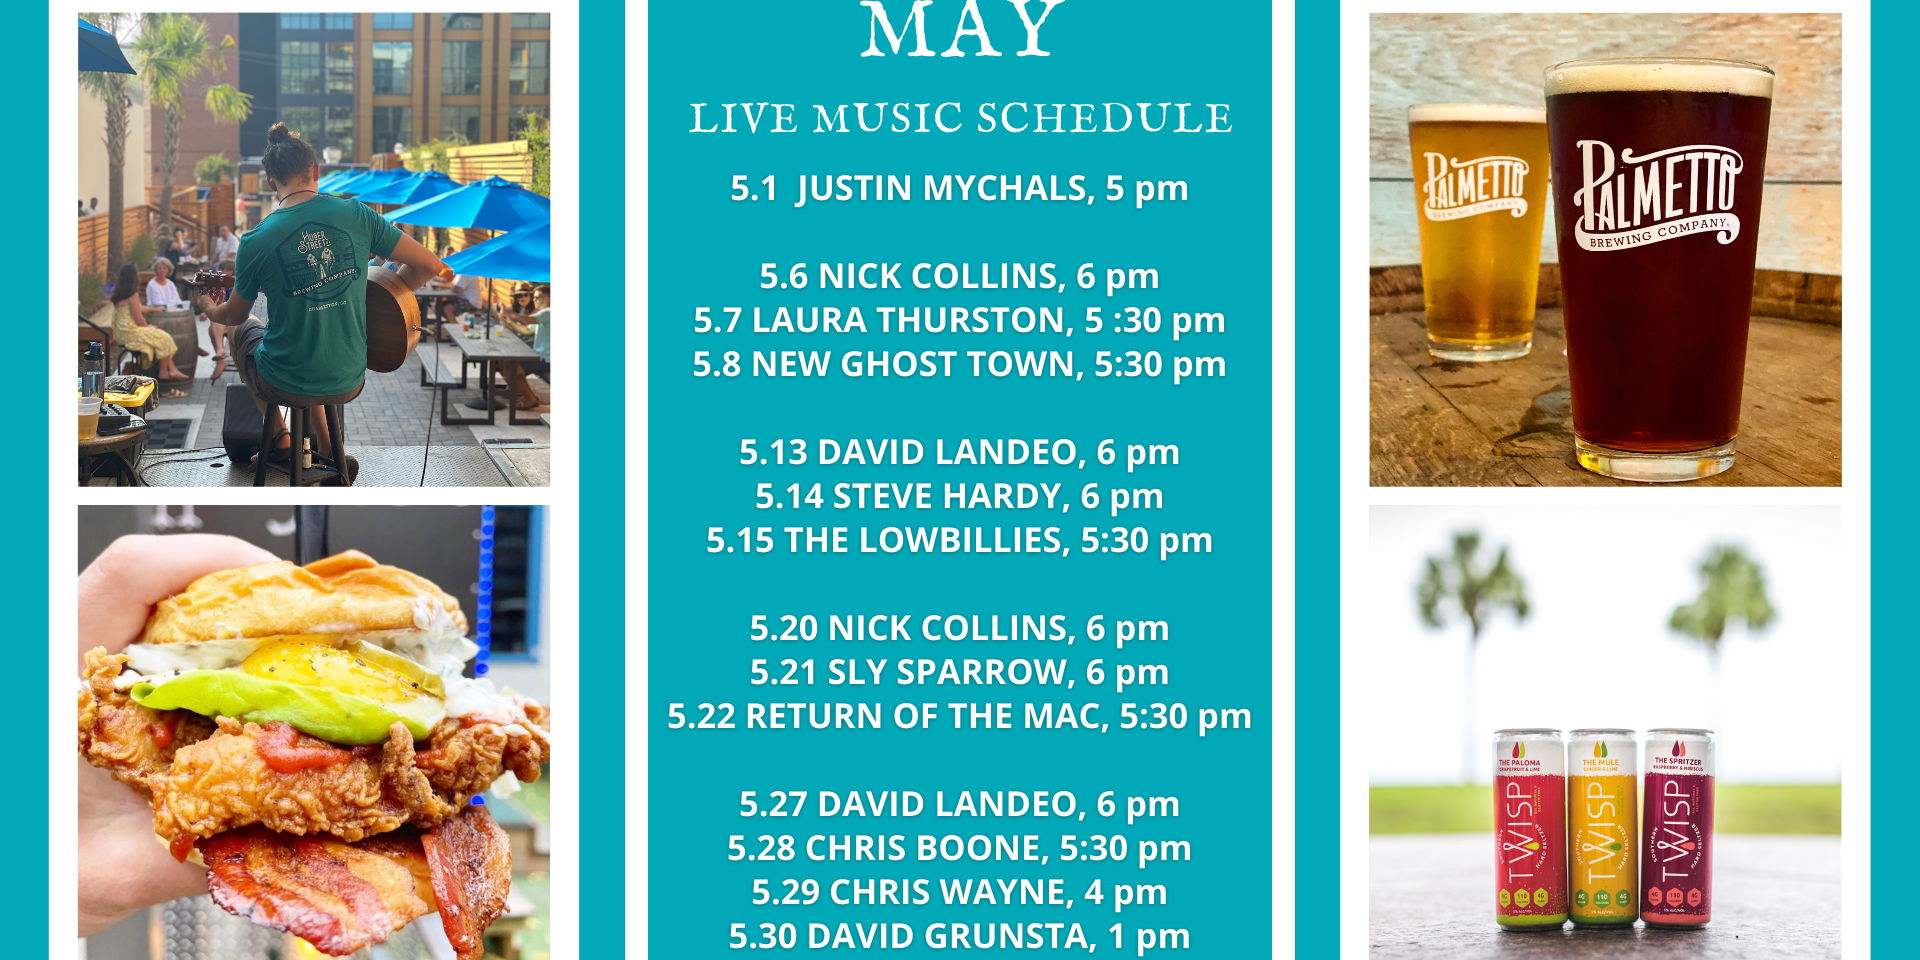 May Live Music Schedule  promotional image